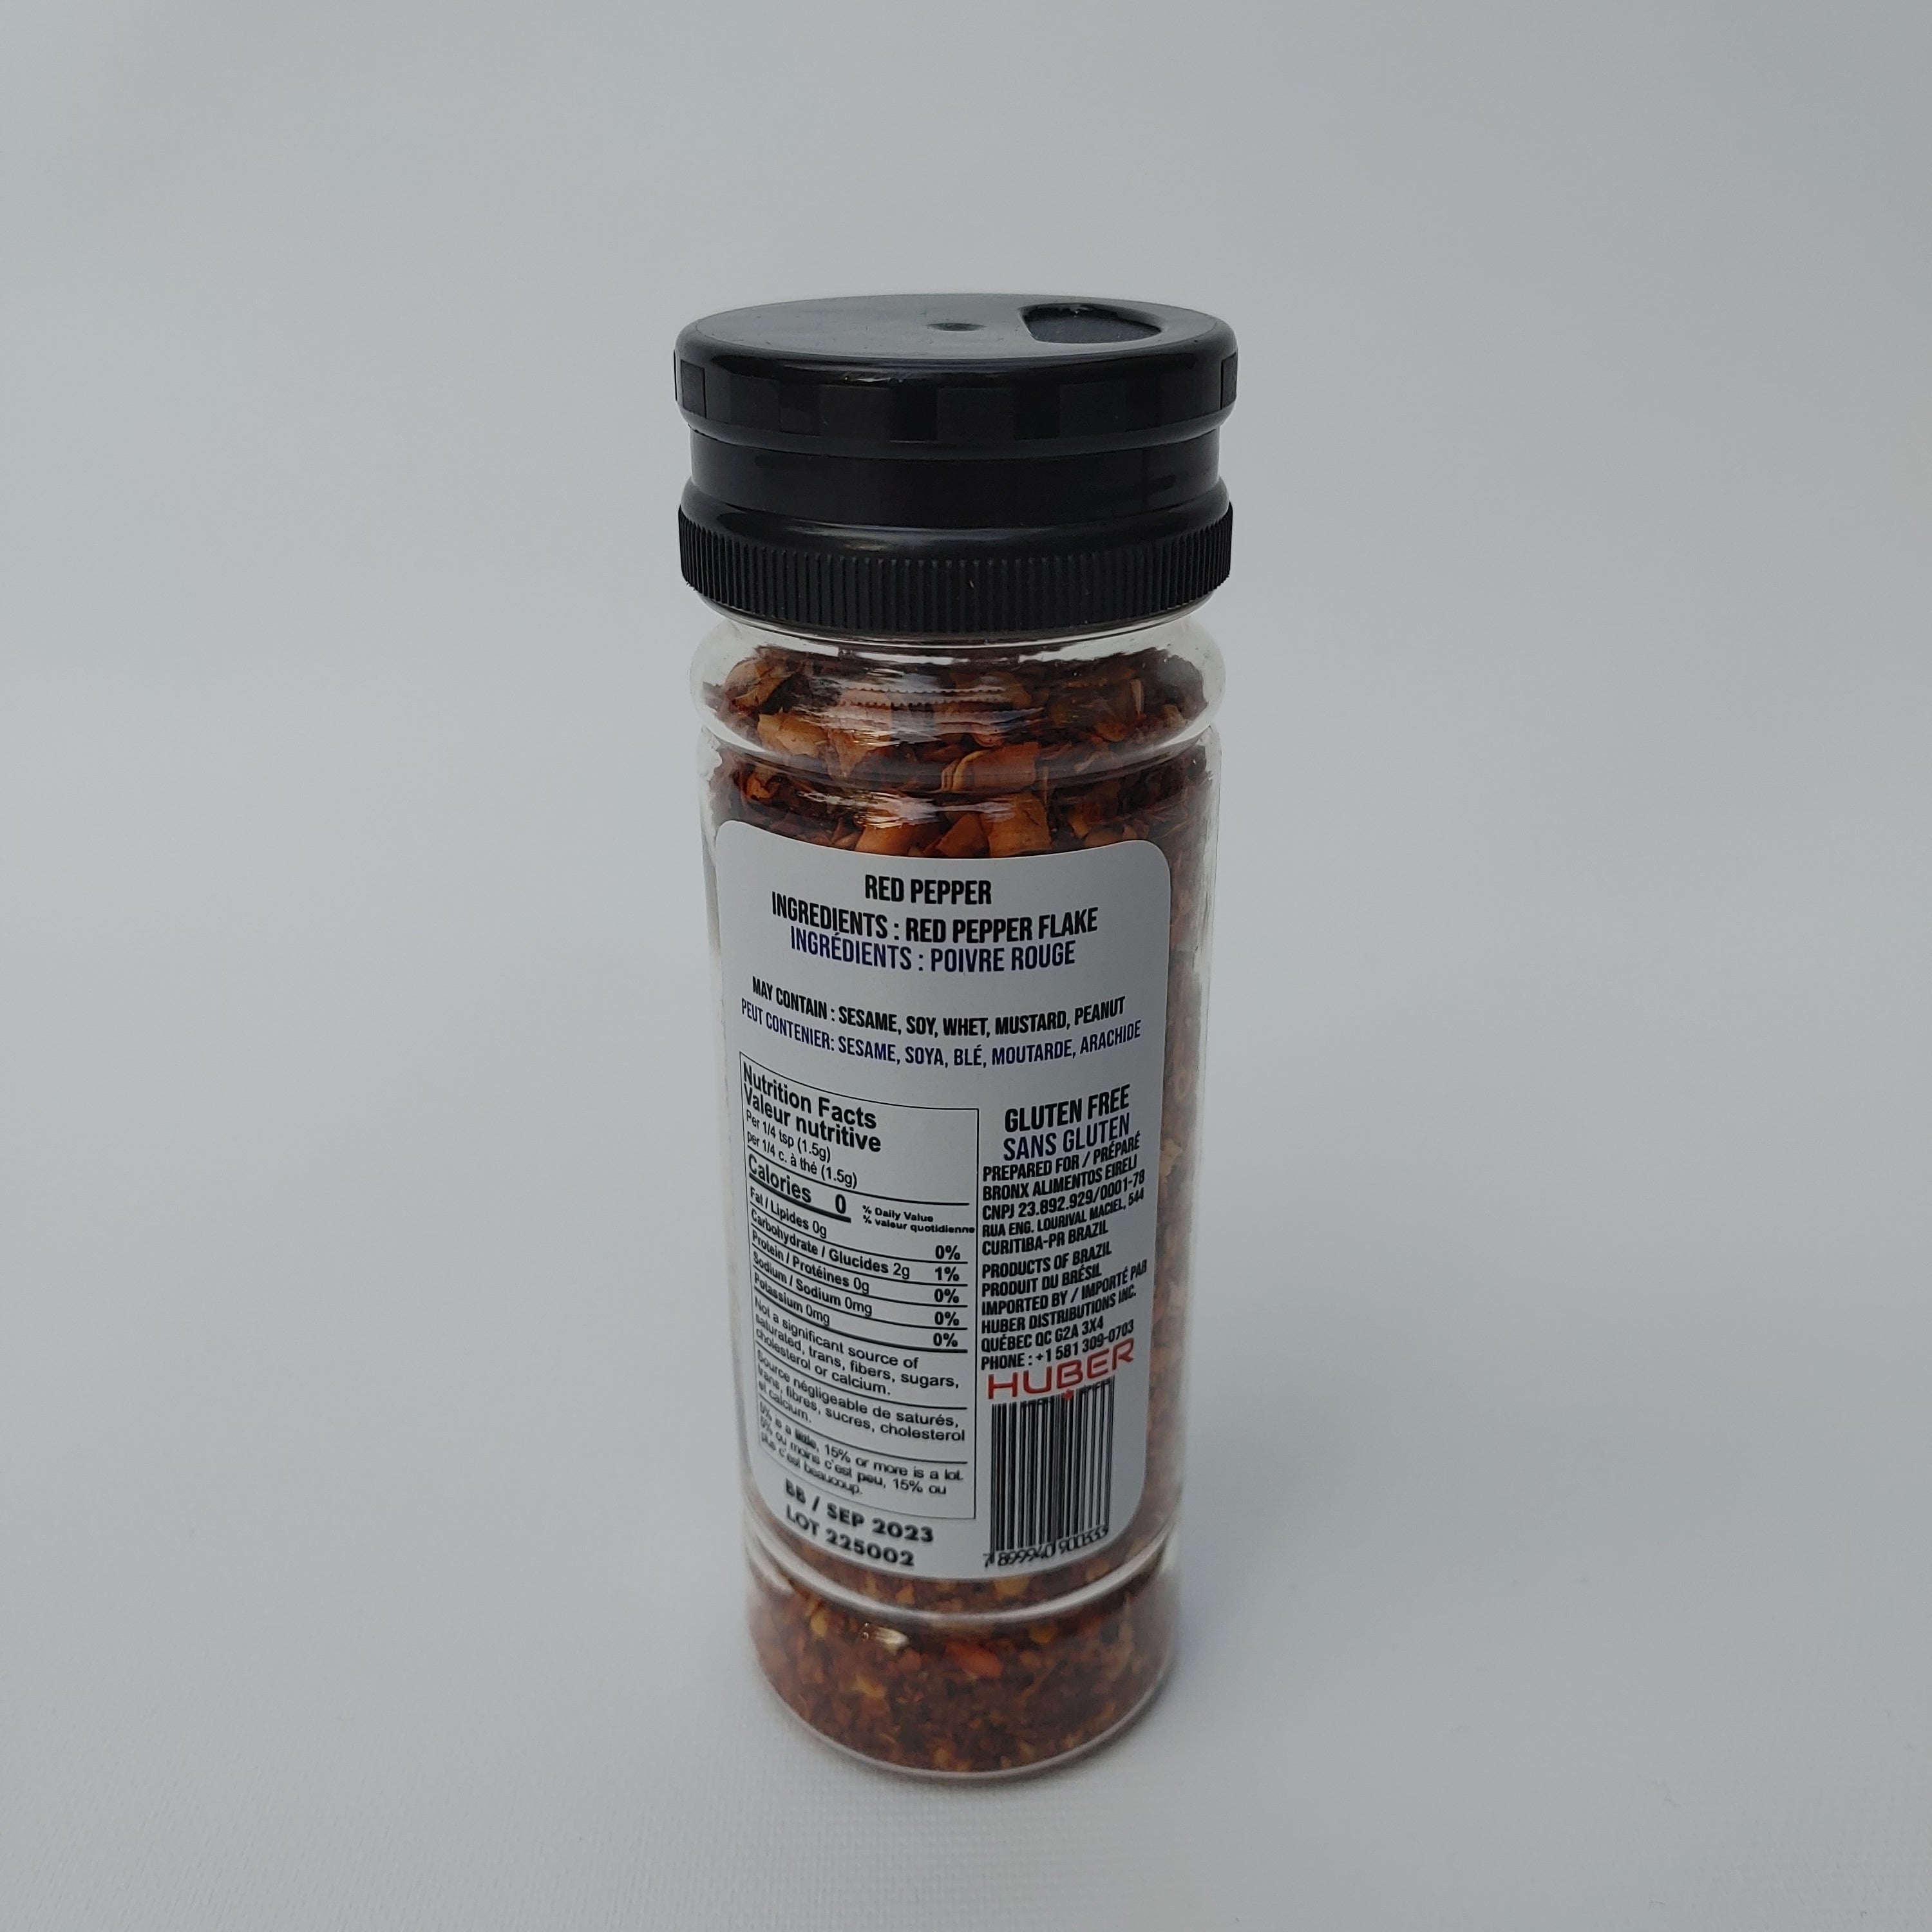 HUBER - Red Pepper - FINAL SALE - EXPIRED or CLOSE TO EXPIRY